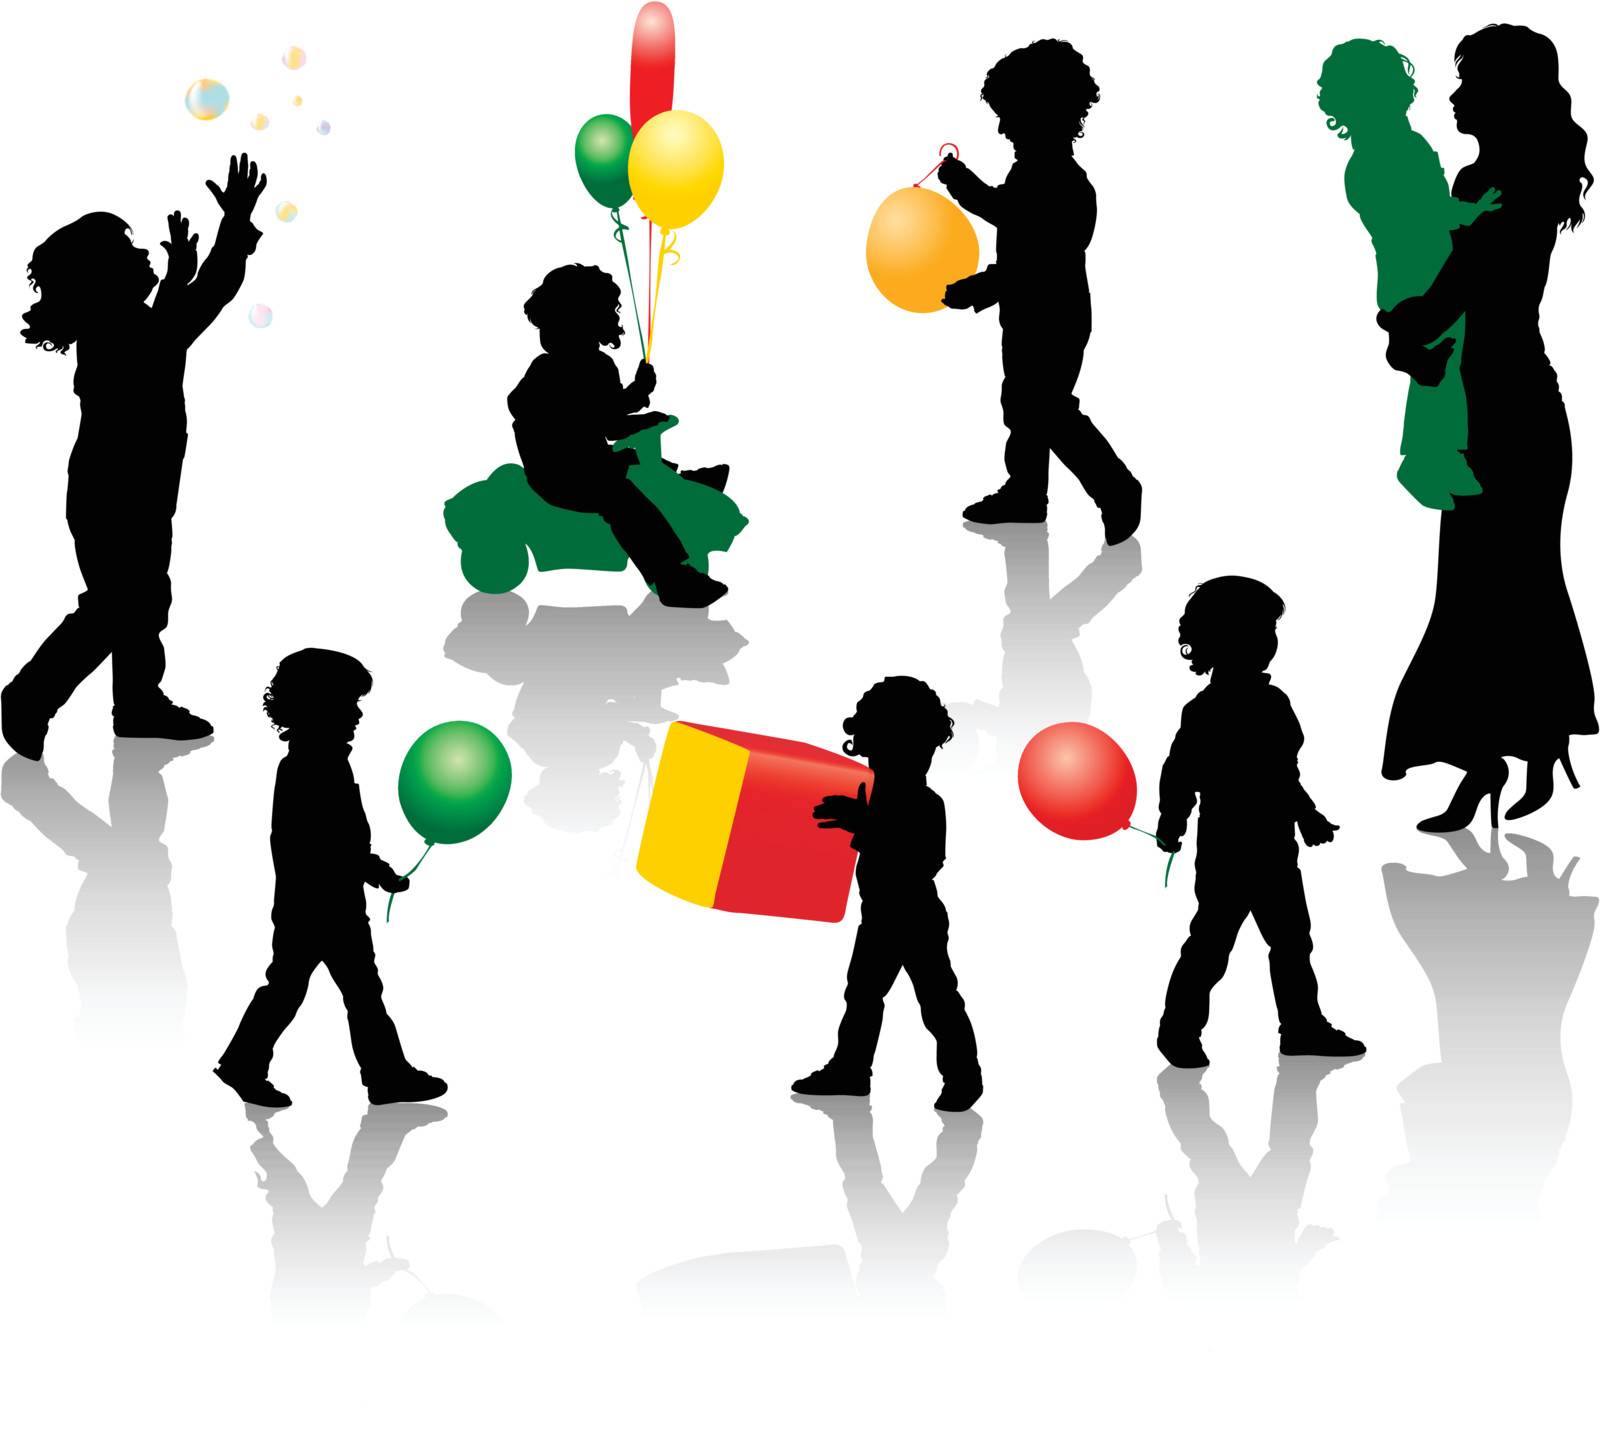 The silhouettes of a boy playing with a balloon, bubbles, toys. Silhouette mother with a boy in her arms.